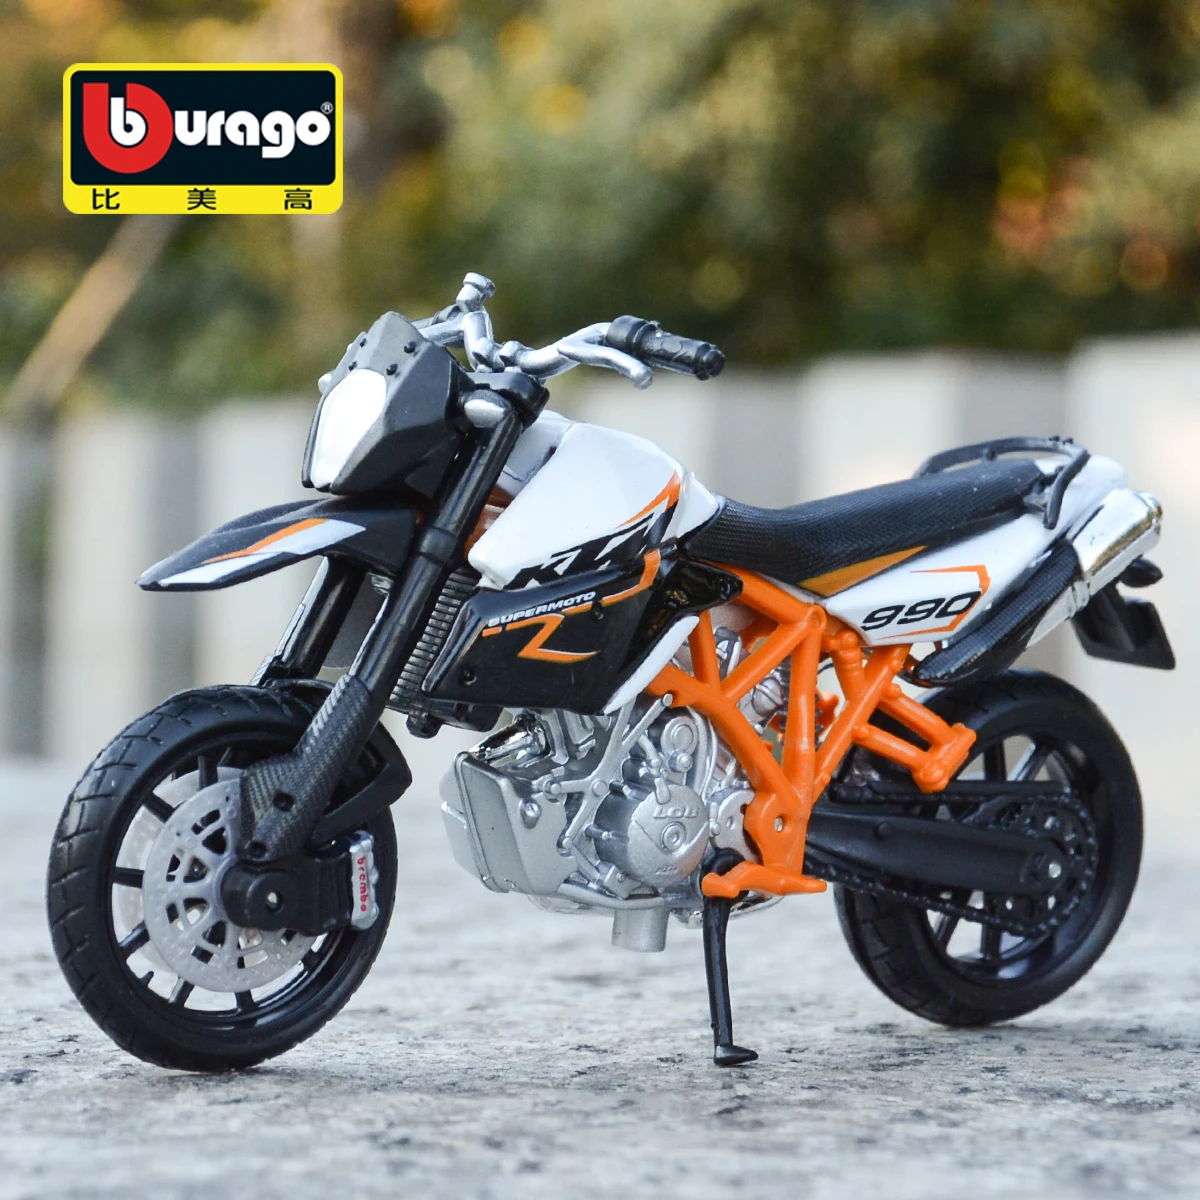 Bburago 1:18 KTM 990 Supermoto R Static Die Cast Vehicles Collectible Motorcycle Model Toys